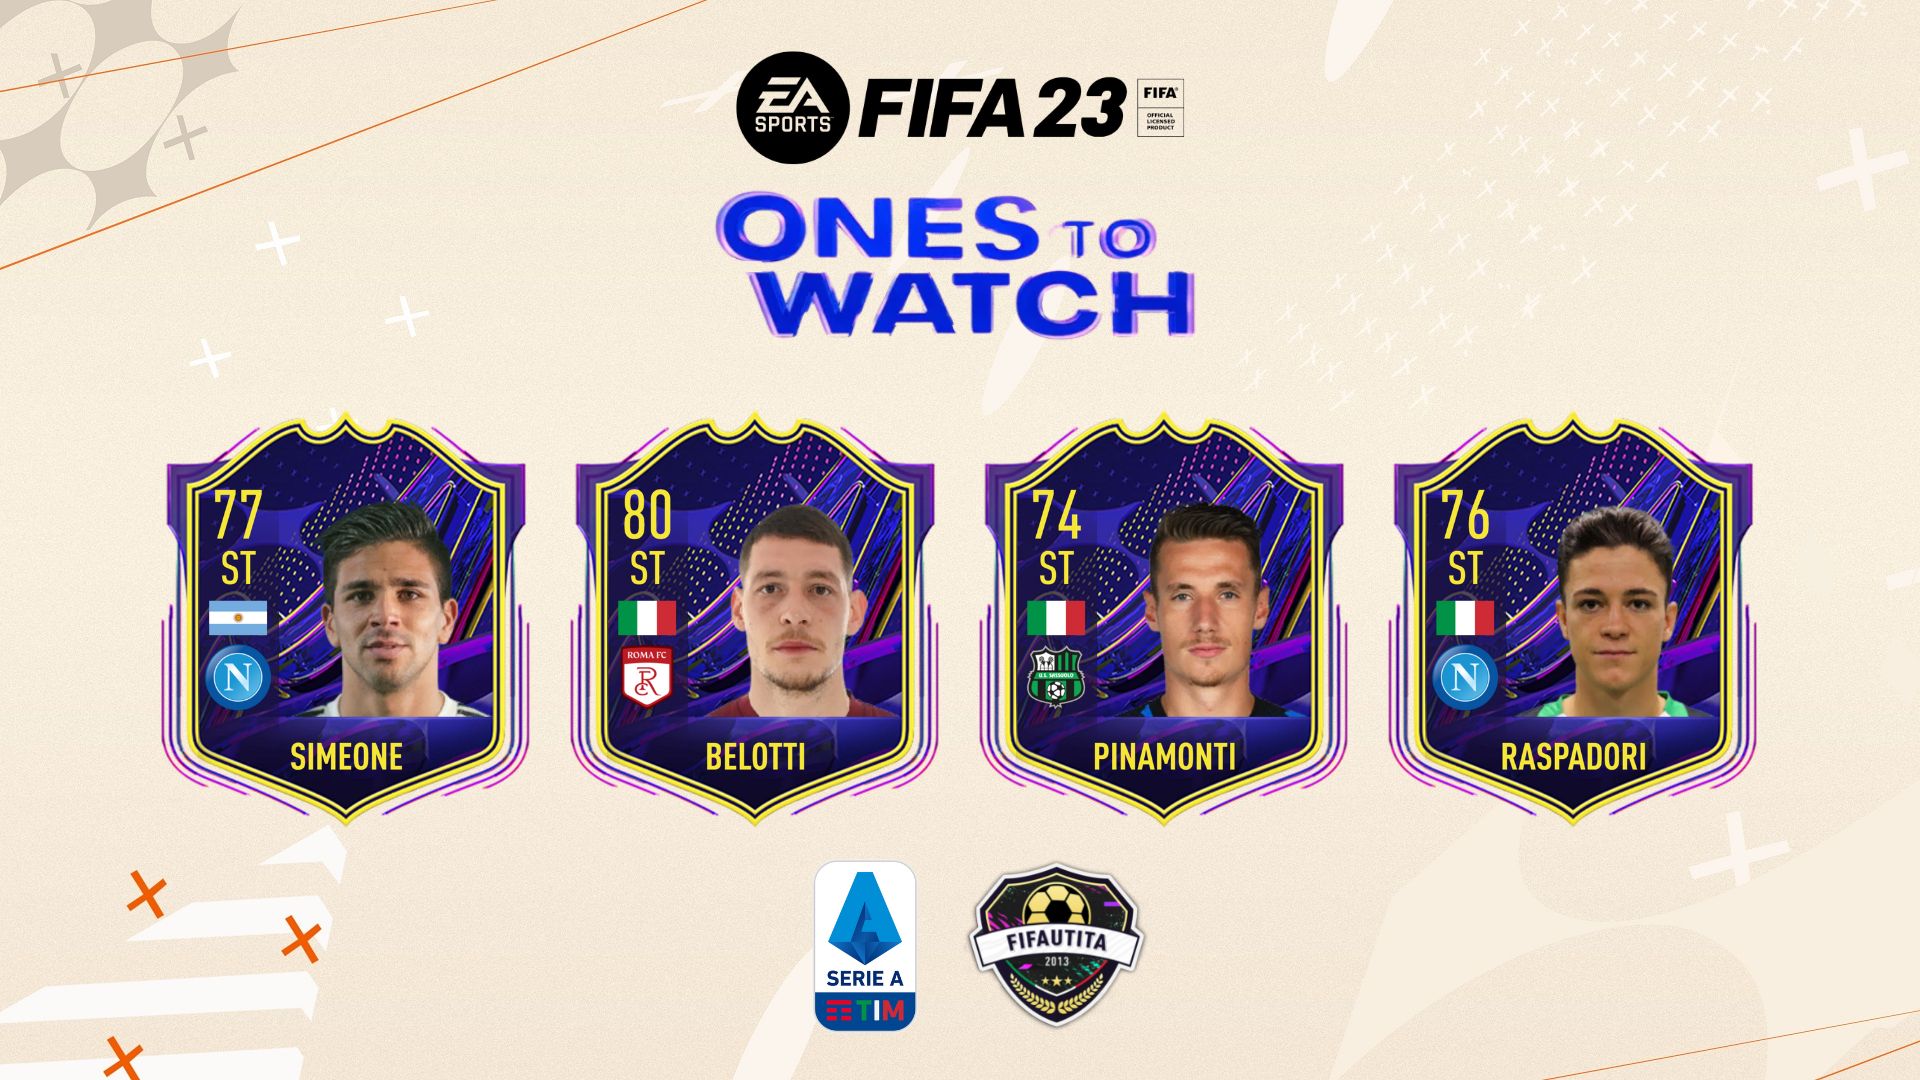 FIFA 23 OTW: Attaccanti Serie A Ones to Watch prediction